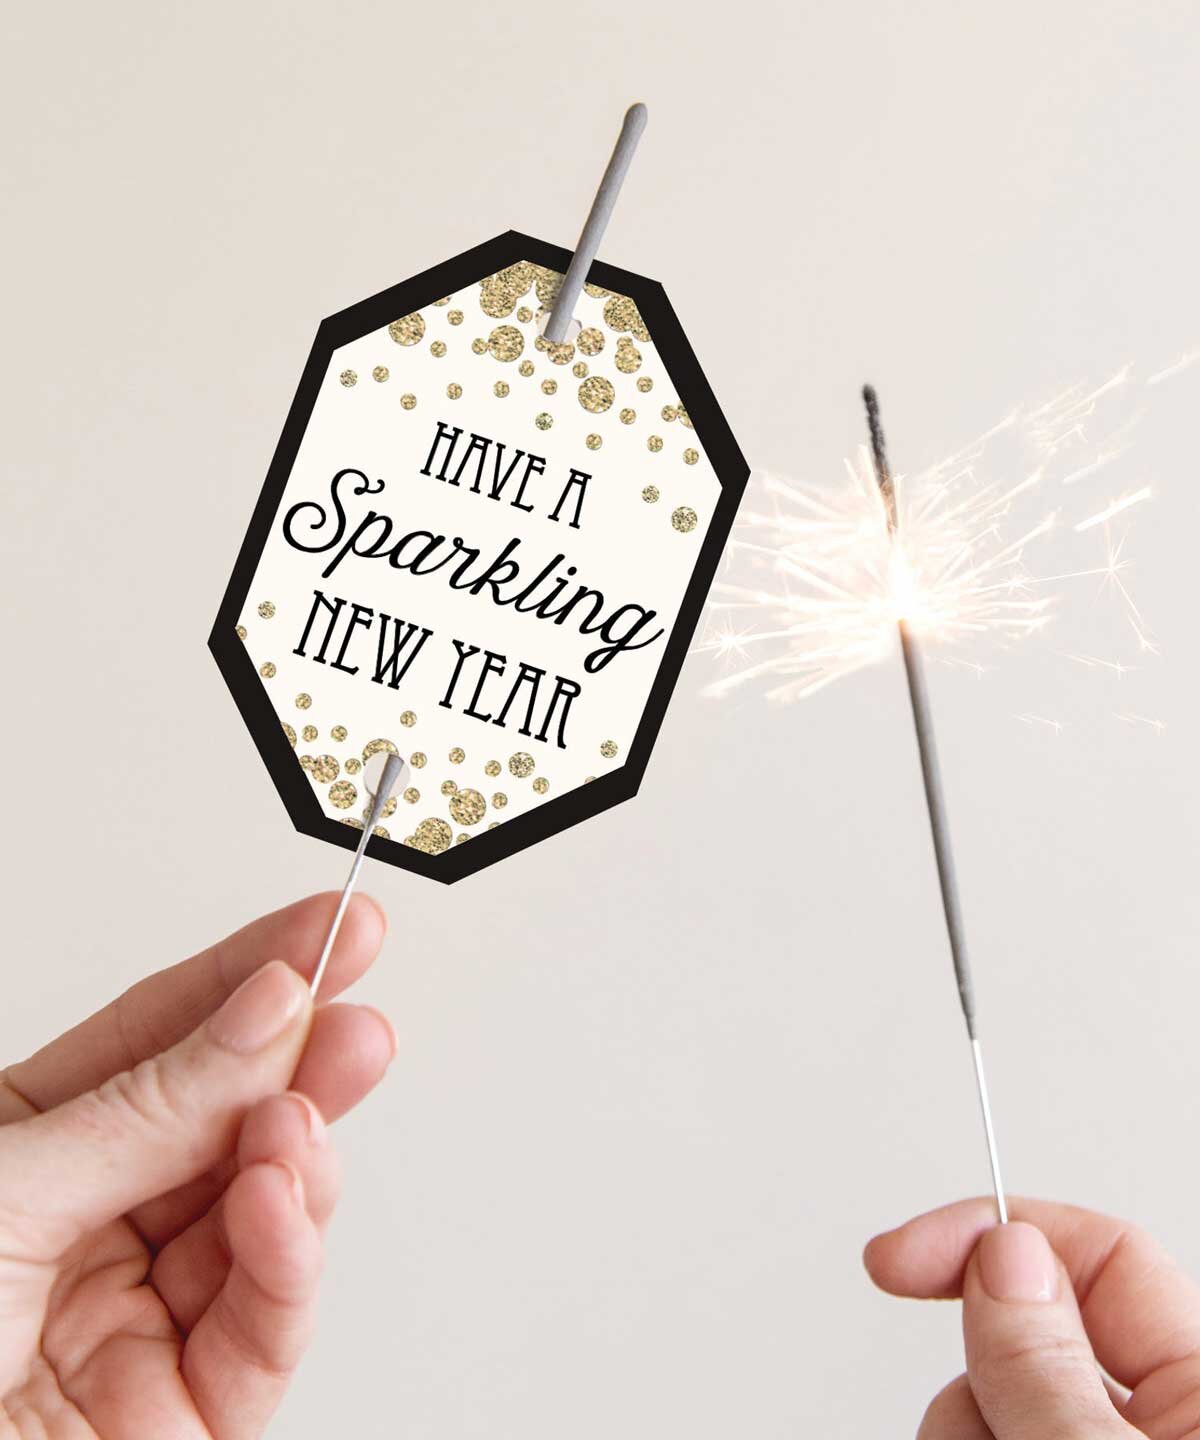 New Years Eve Sparkler Tags